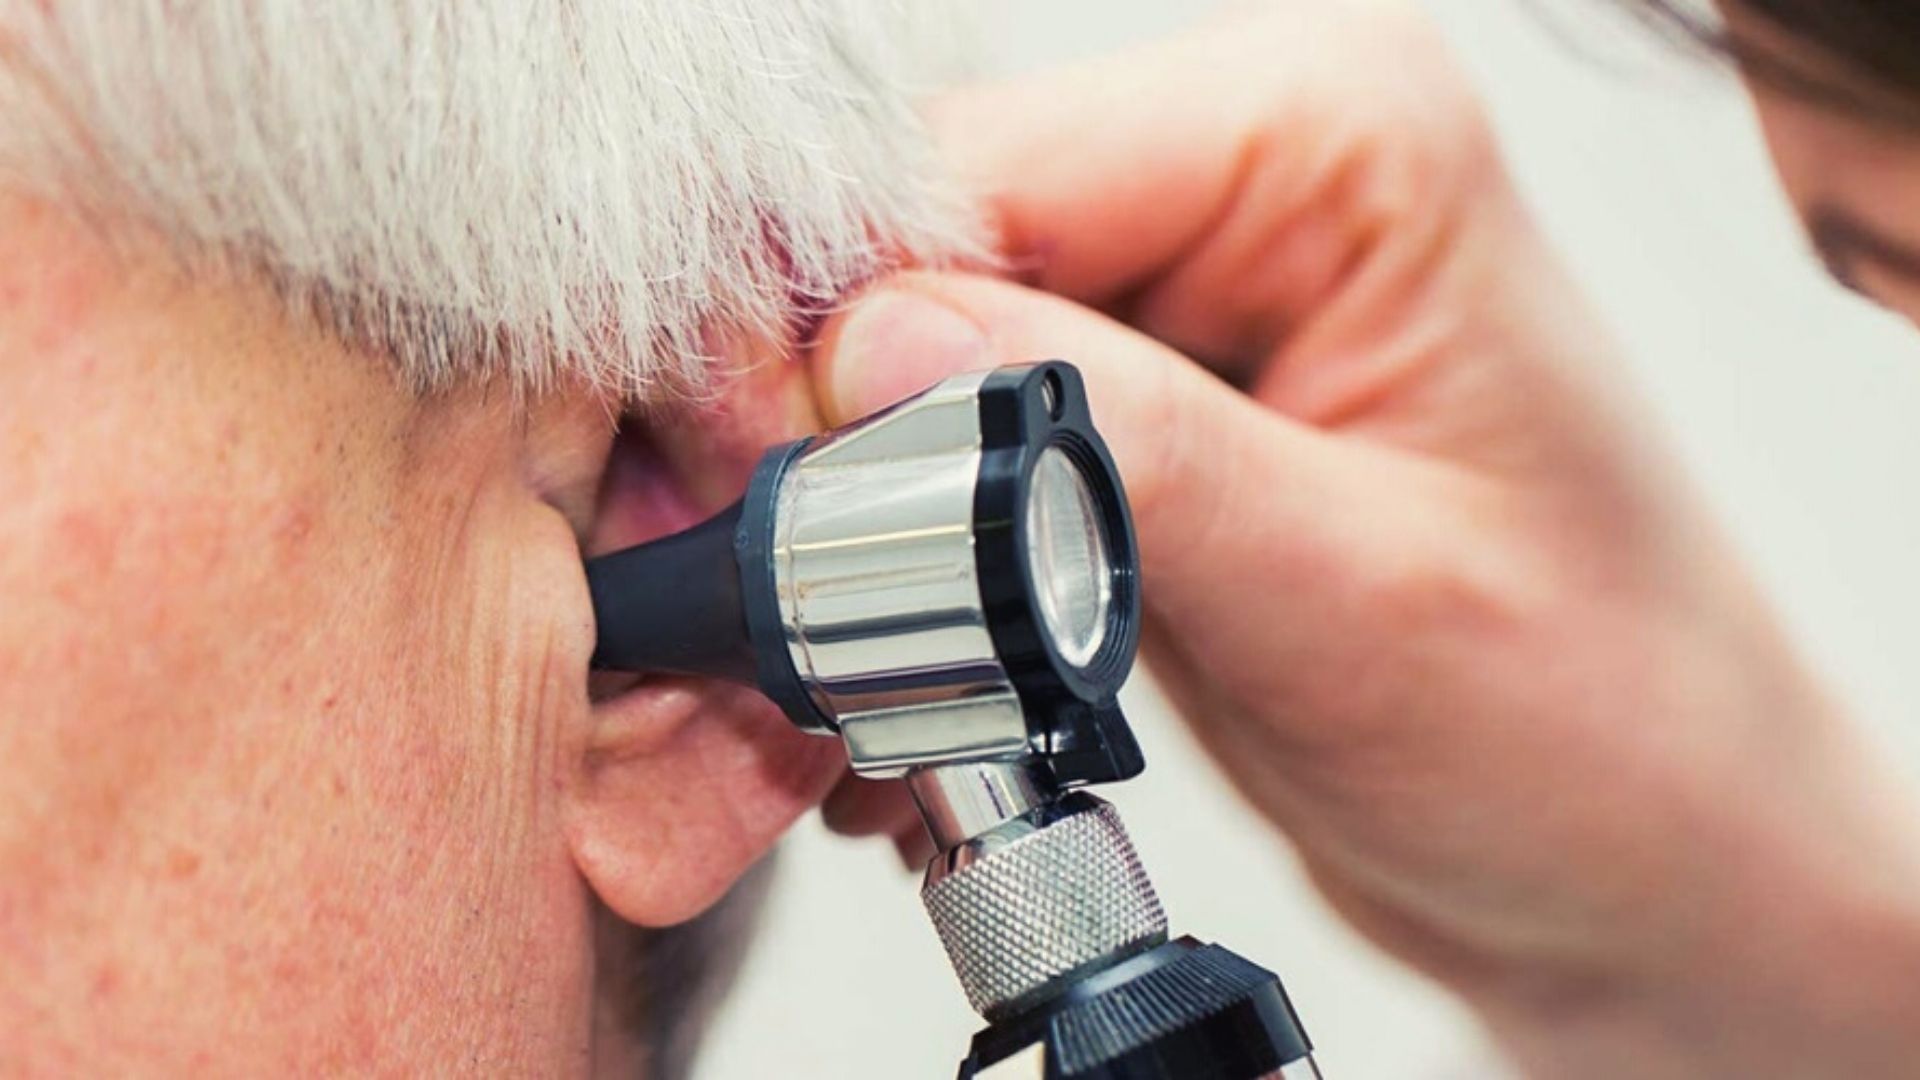 Precautions To be Taken To Prevent Hearing Loss